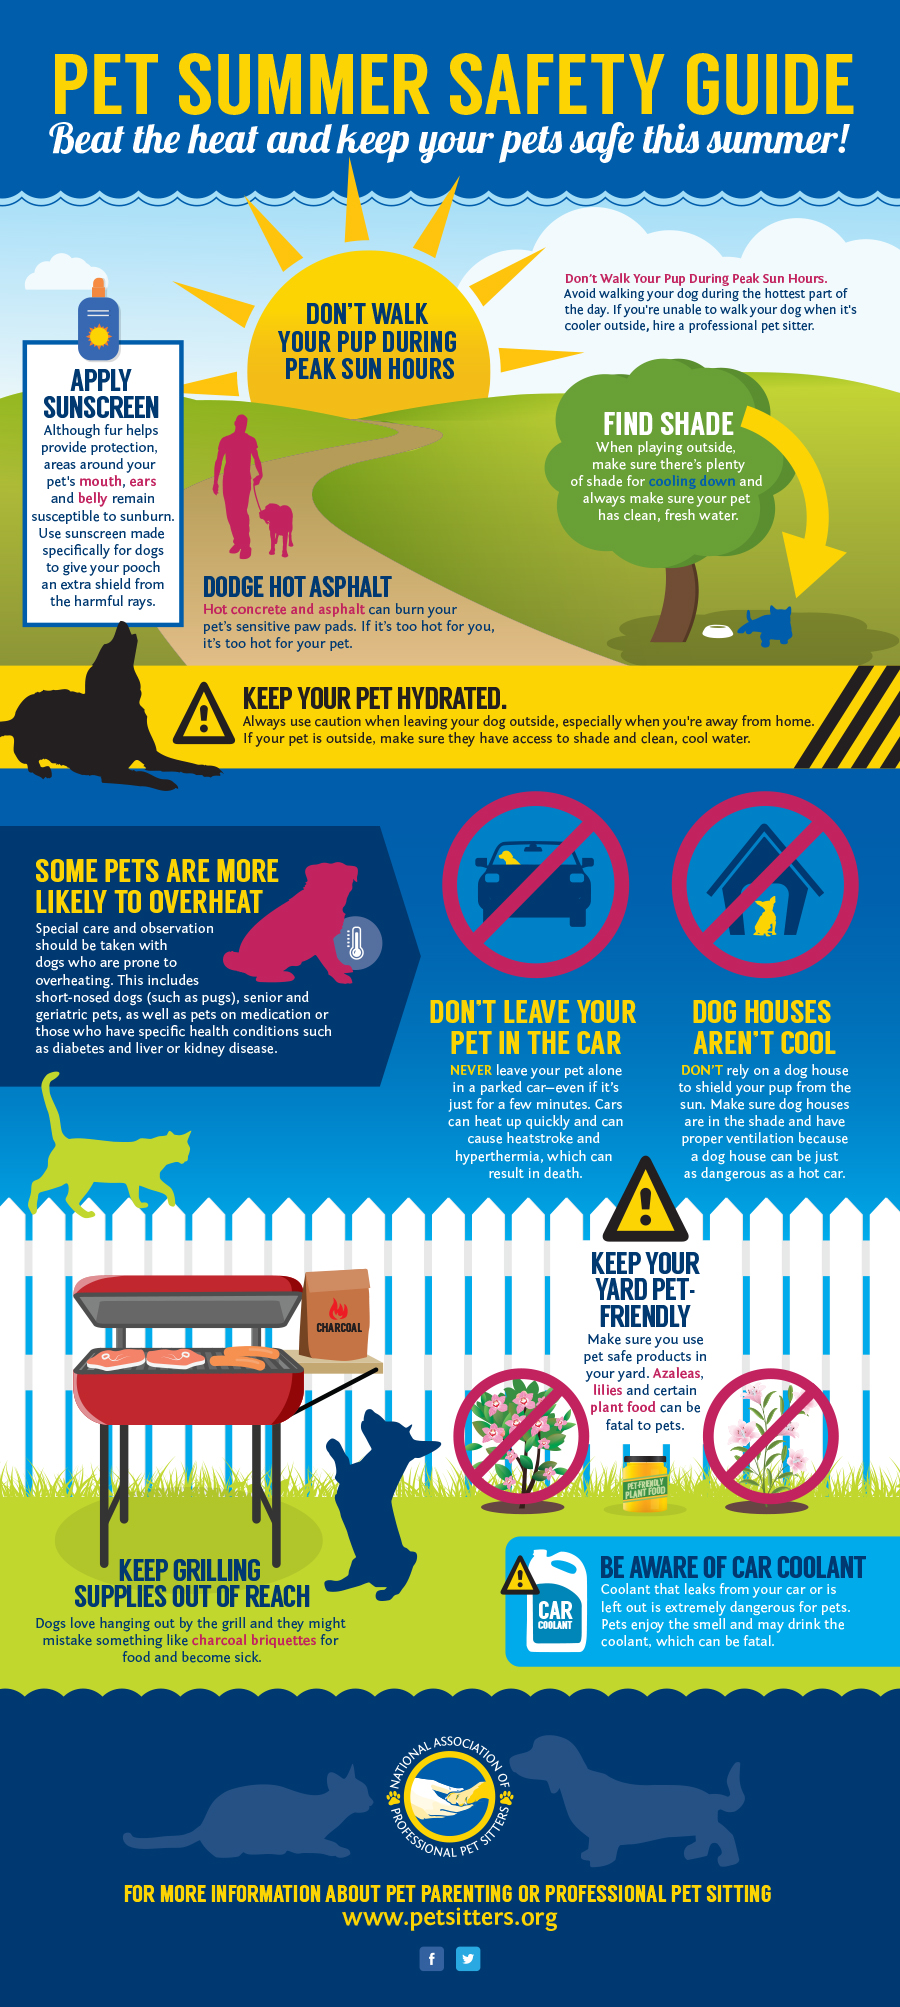 NAPPS-15-SummerSafety-Infographic-Final